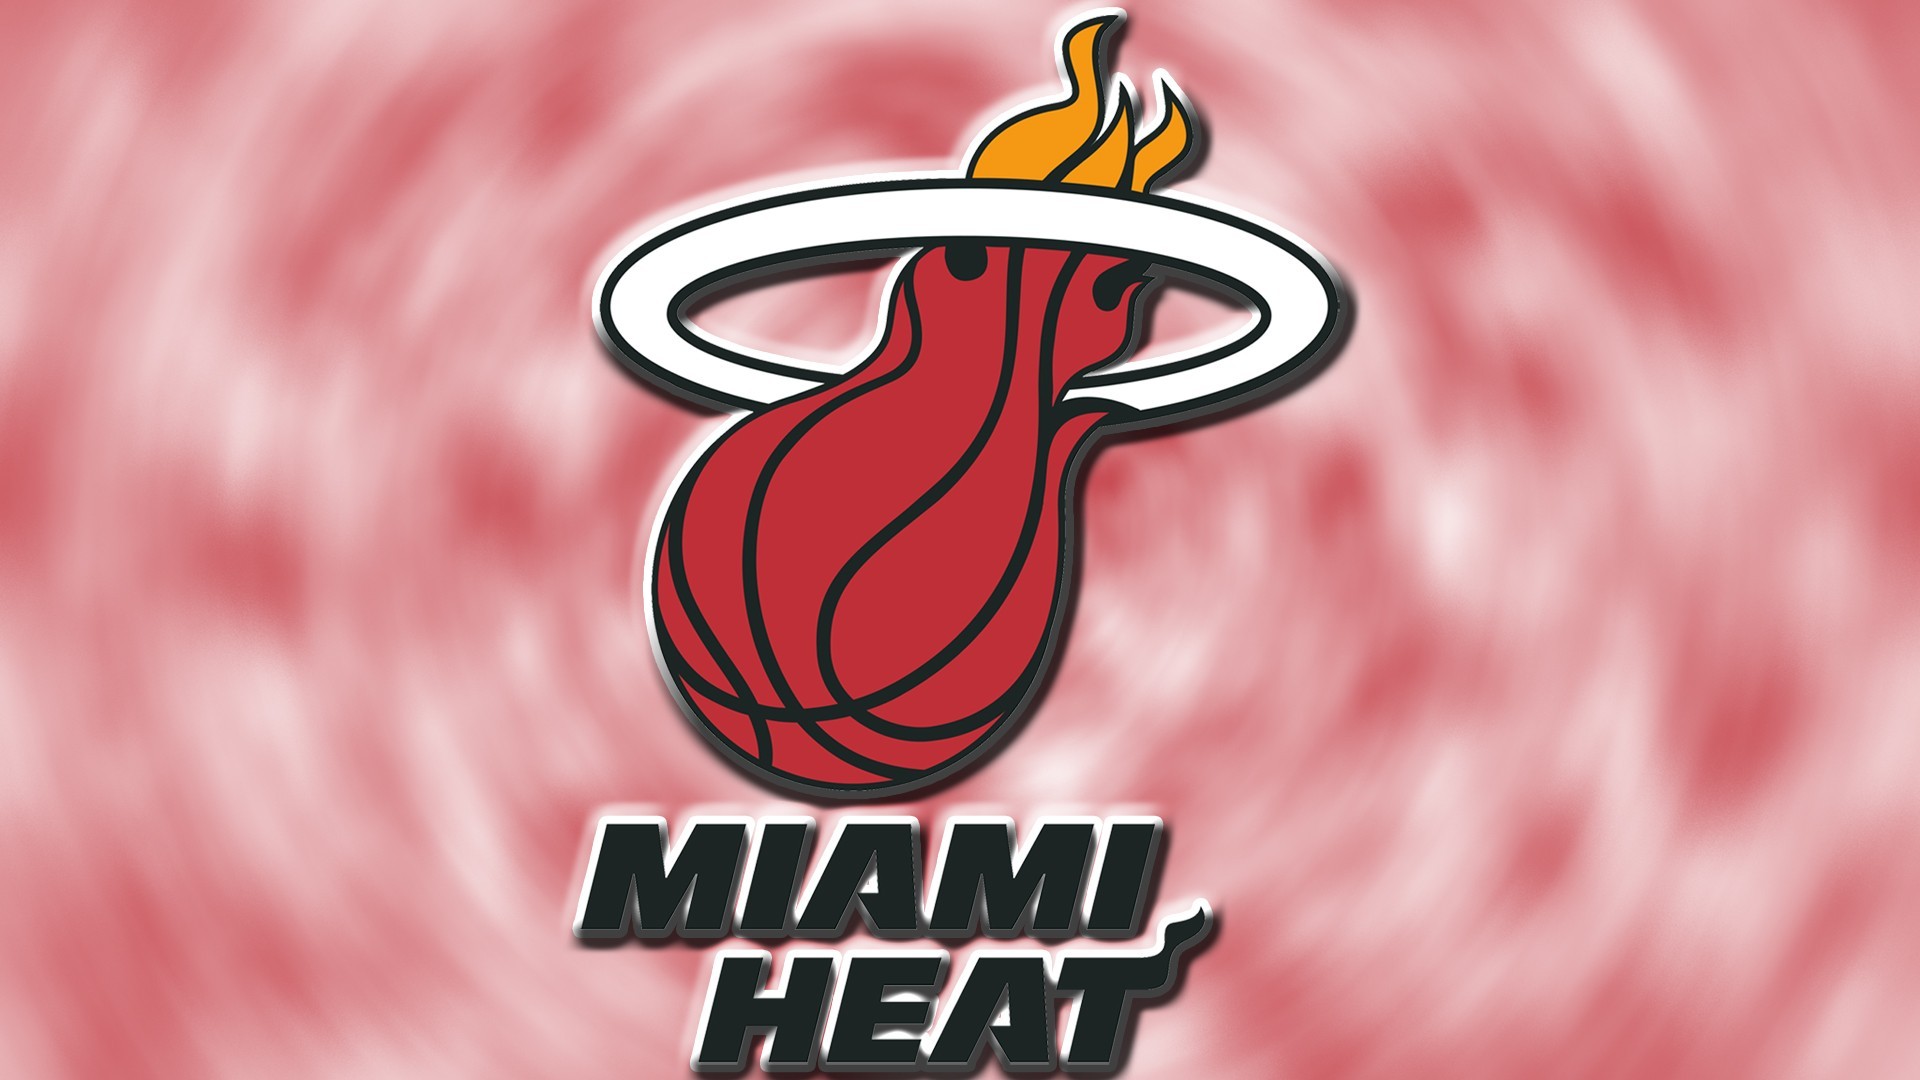 Wallpaper Desktop Miami Heat HD with high-resolution 1920x1080 pixel. You can use this wallpaper for your Desktop Computer Backgrounds, Windows or Mac Screensavers, iPhone Lock screen, Tablet or Android and another Mobile Phone device